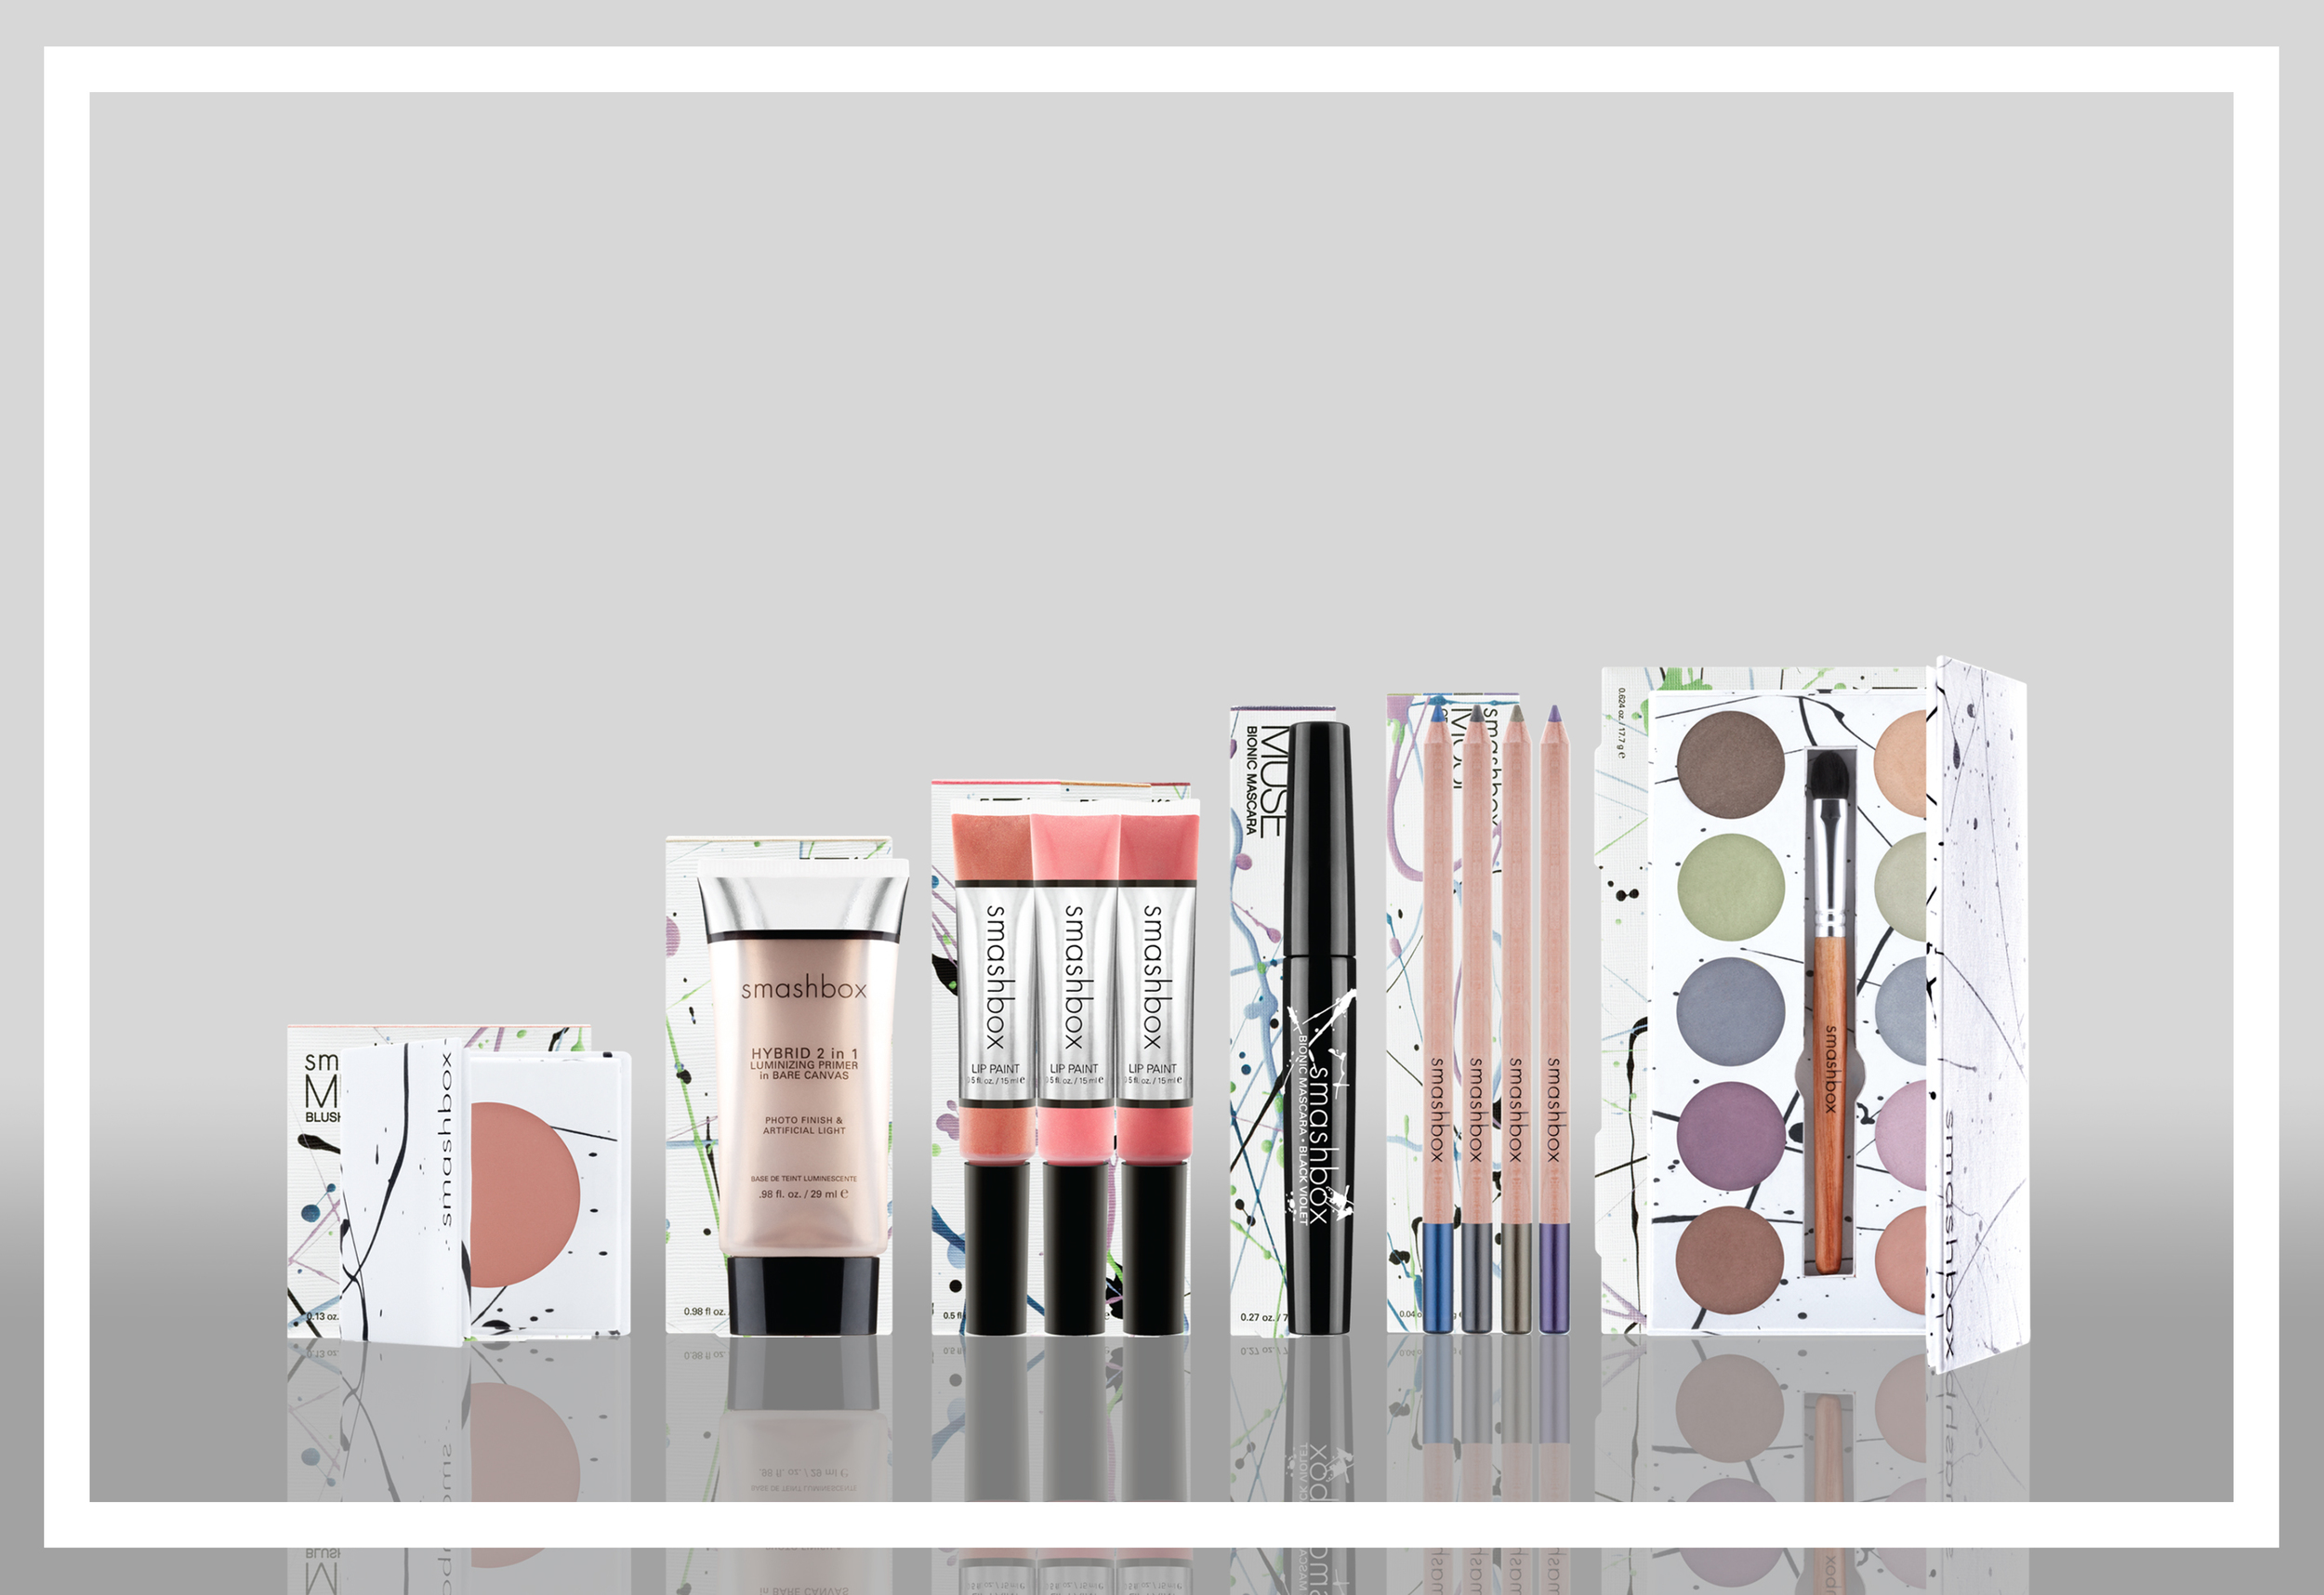  Primary and secondary packaging for Muse spring collection at Smashbox Cosmetics 